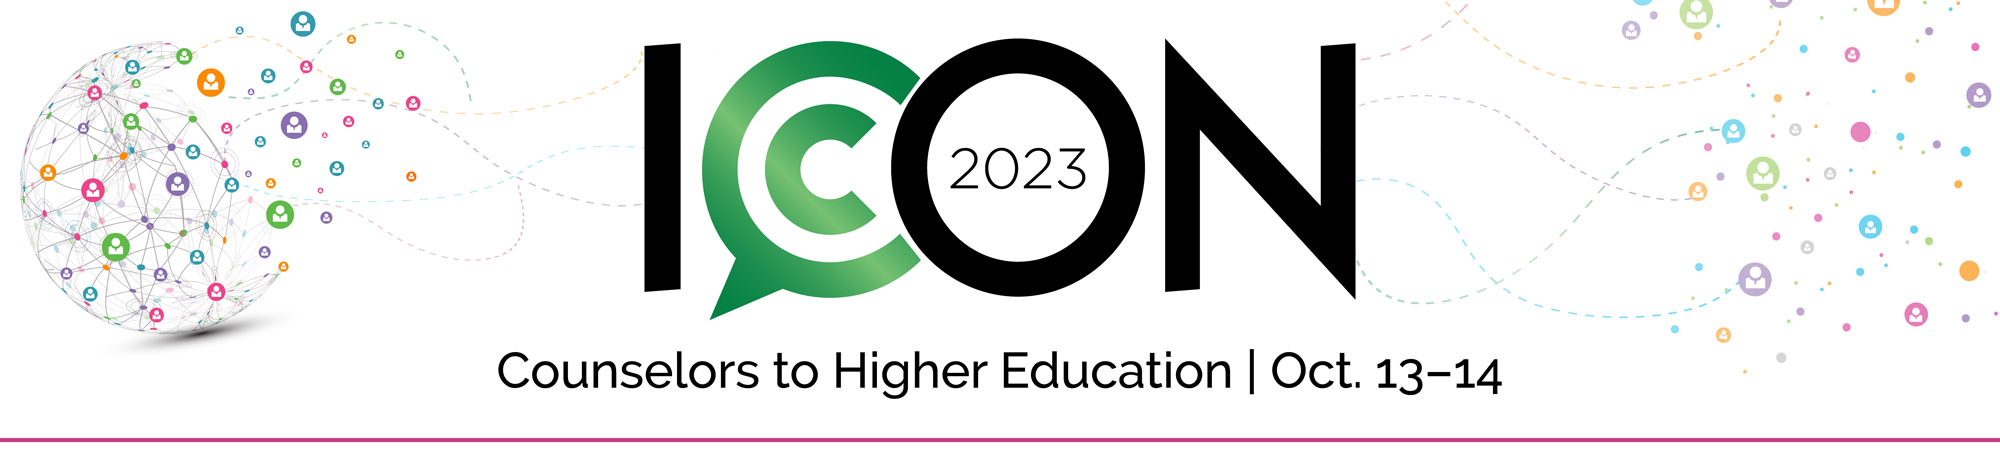 PRSA Counselors to Higher Education ICON 2023 Conference